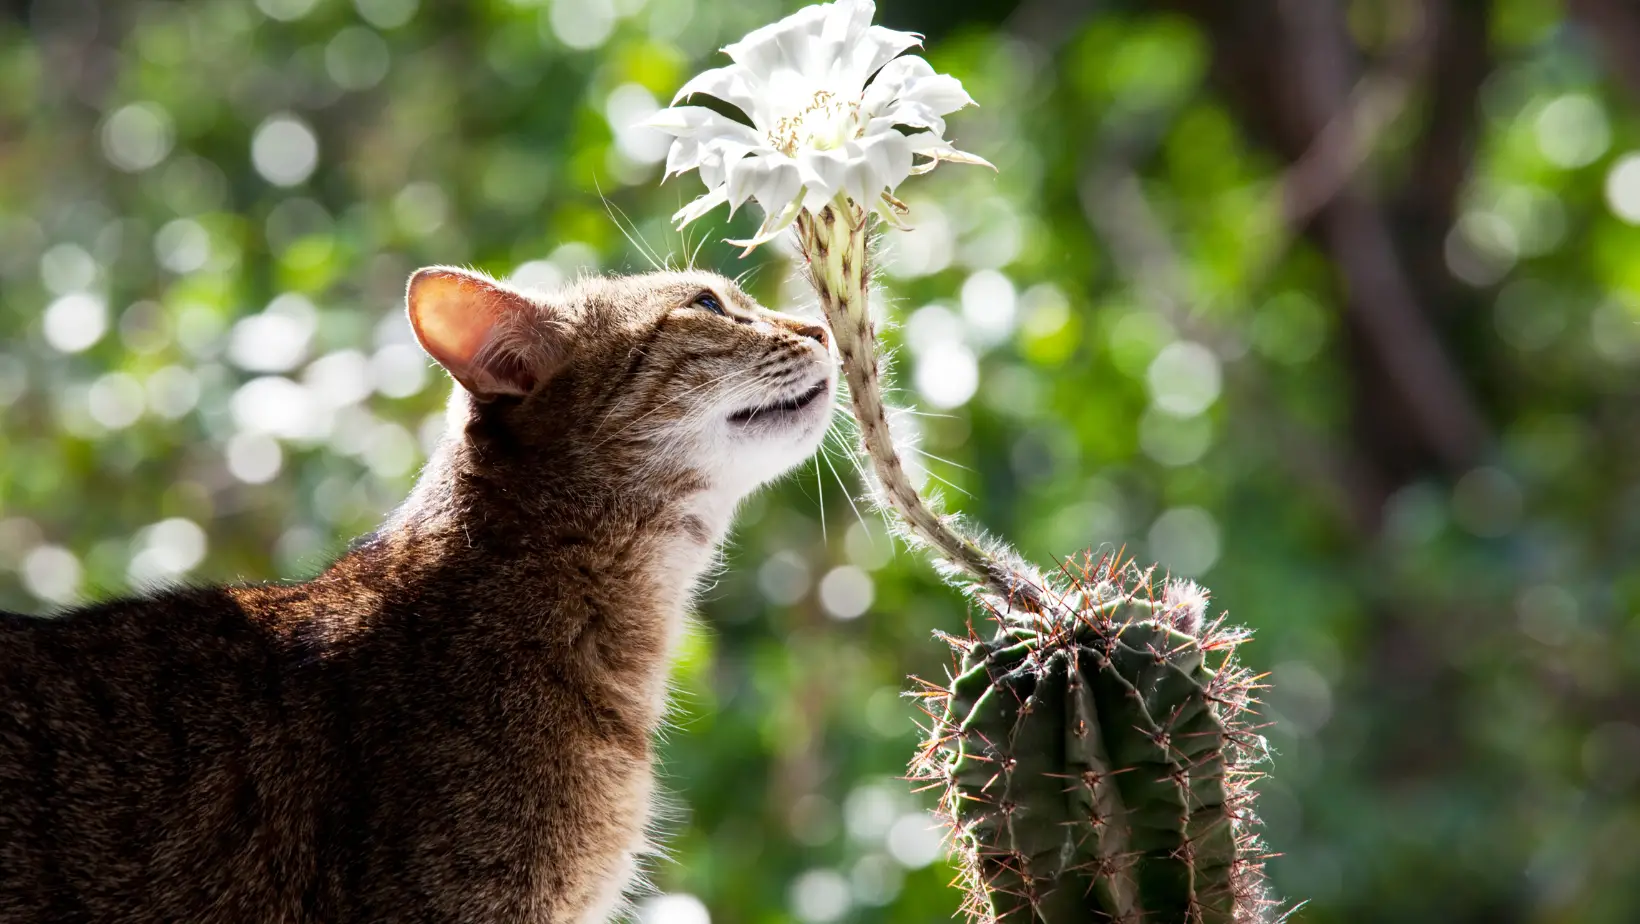 Are Cactus Poisonous to Cats?